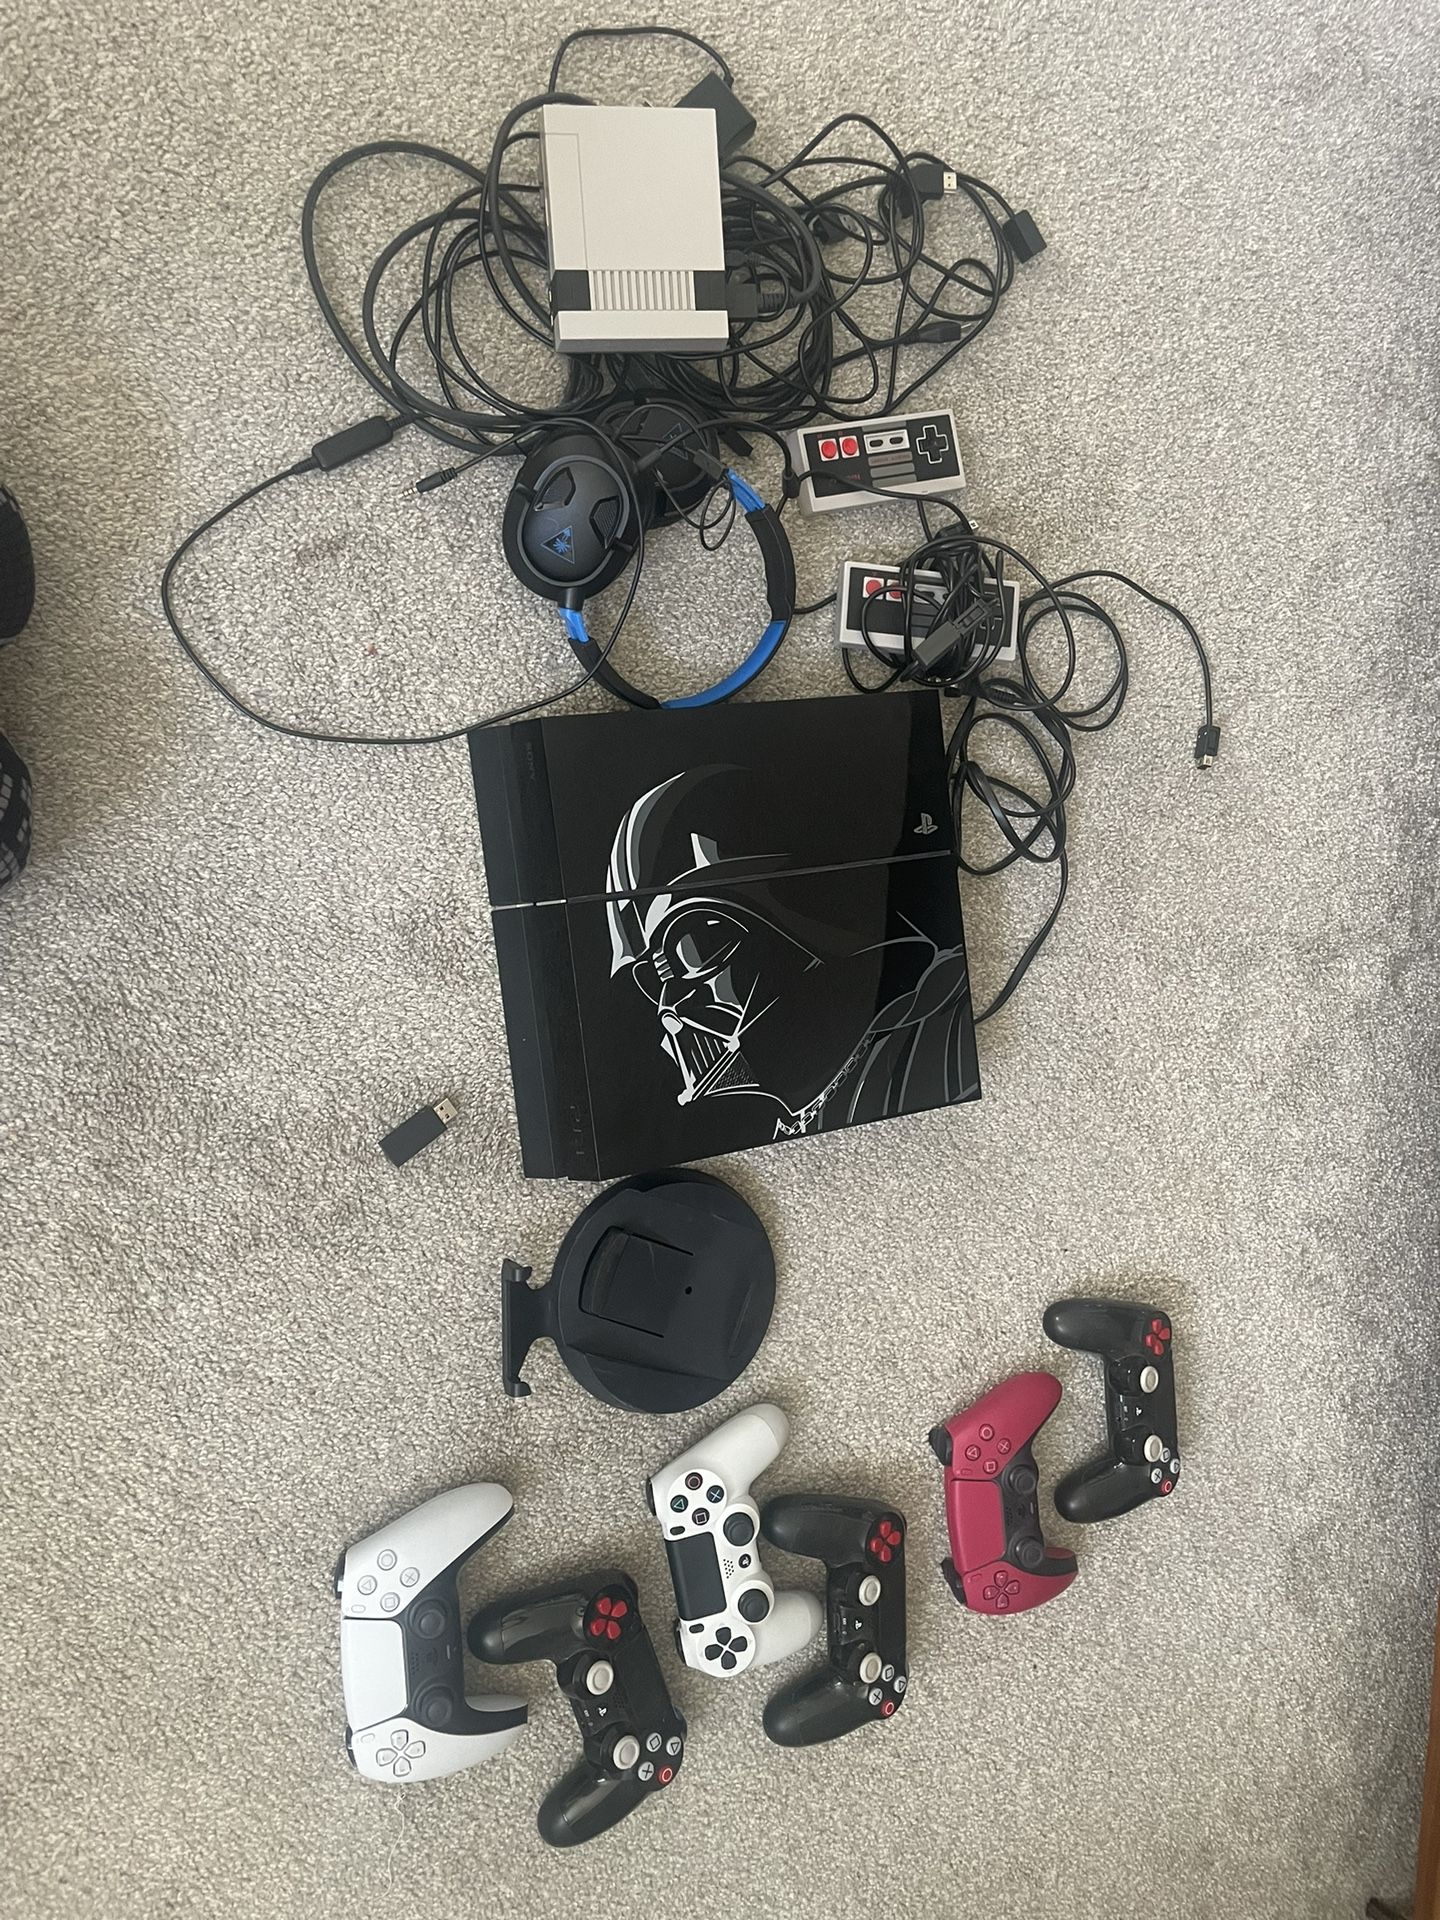 $275 PS4 Star Wars Edition Console Controllers Remotes Ps5 Nintendo Headphones Gaming Video Playstation Black White Red